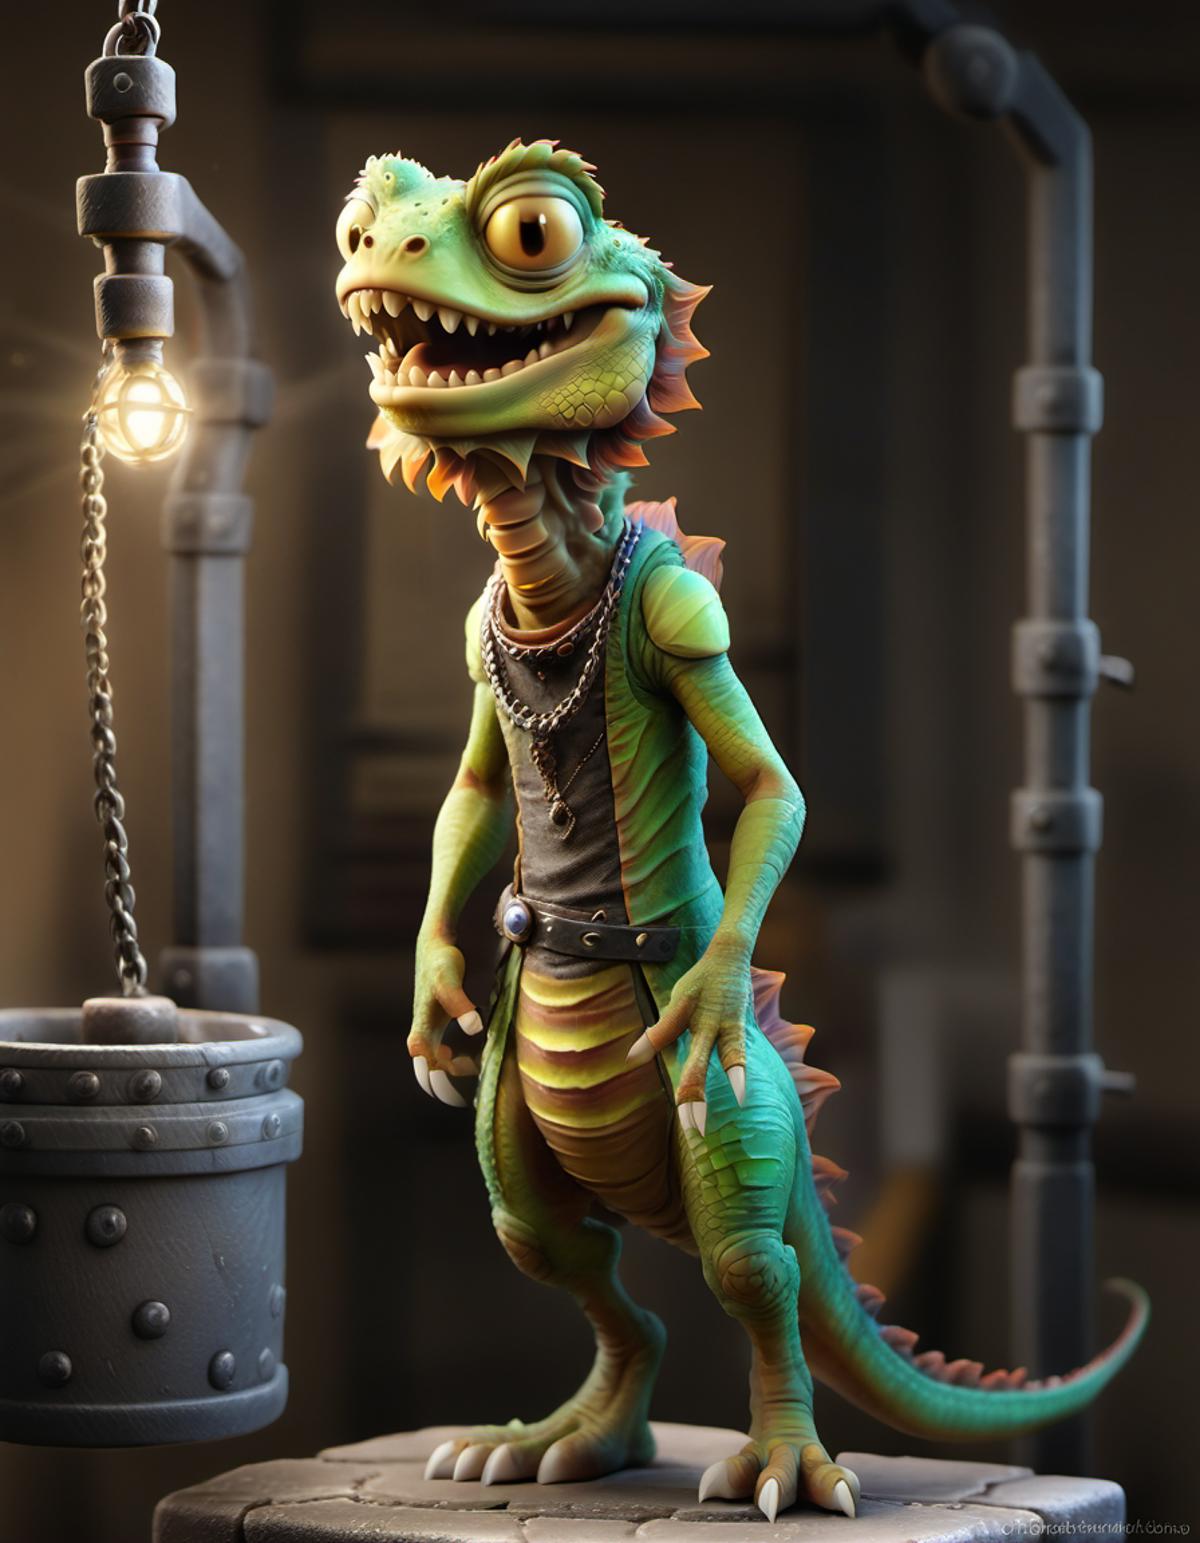 STYLIZARD - 3D Stylized Character Prototyping image by Clumsy_Trainer